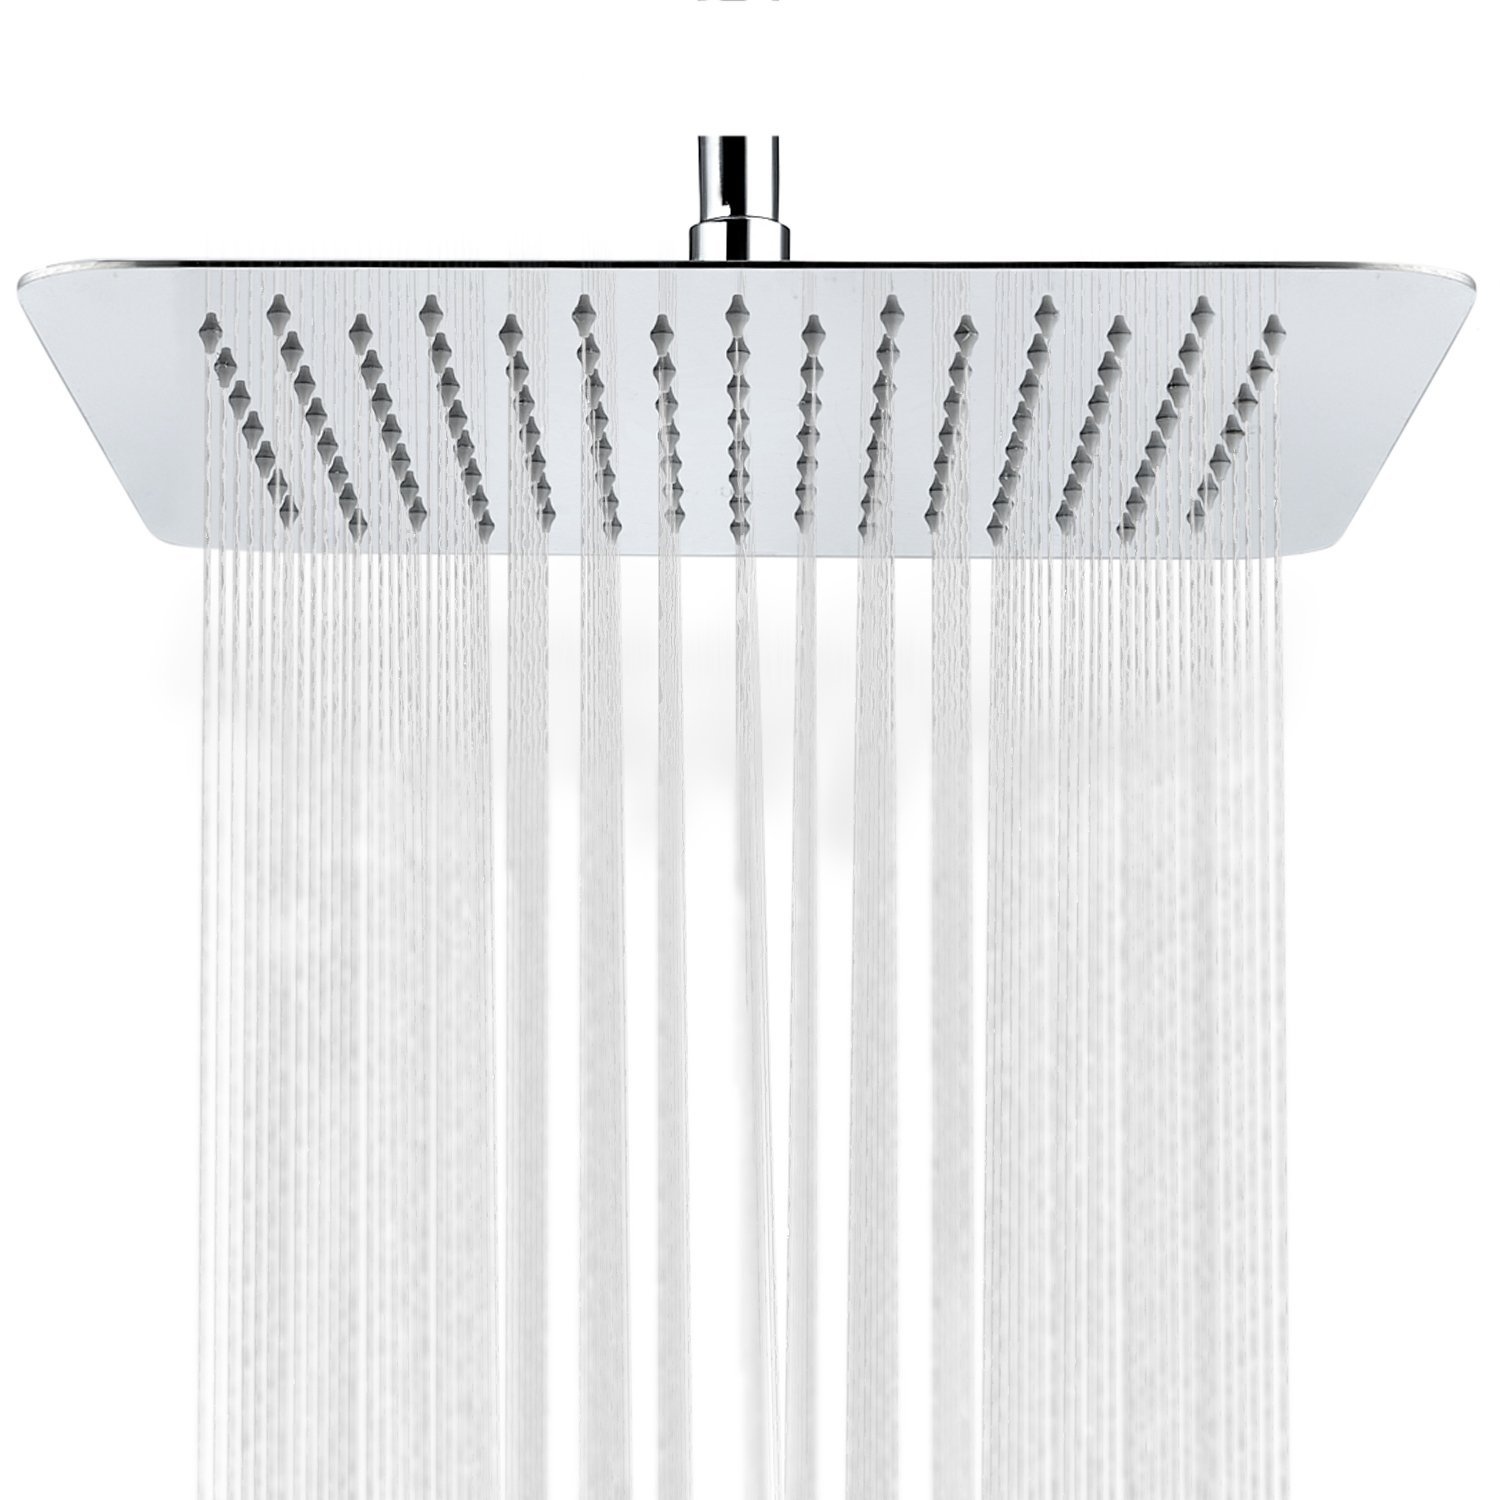 SR SUN RISE SRSH-F5043 Bathroom Luxury Rain Mixer Shower Combo Set Wall Mounted Rainfall Shower Head System Polished Chrome Finish(only for a new remodel)